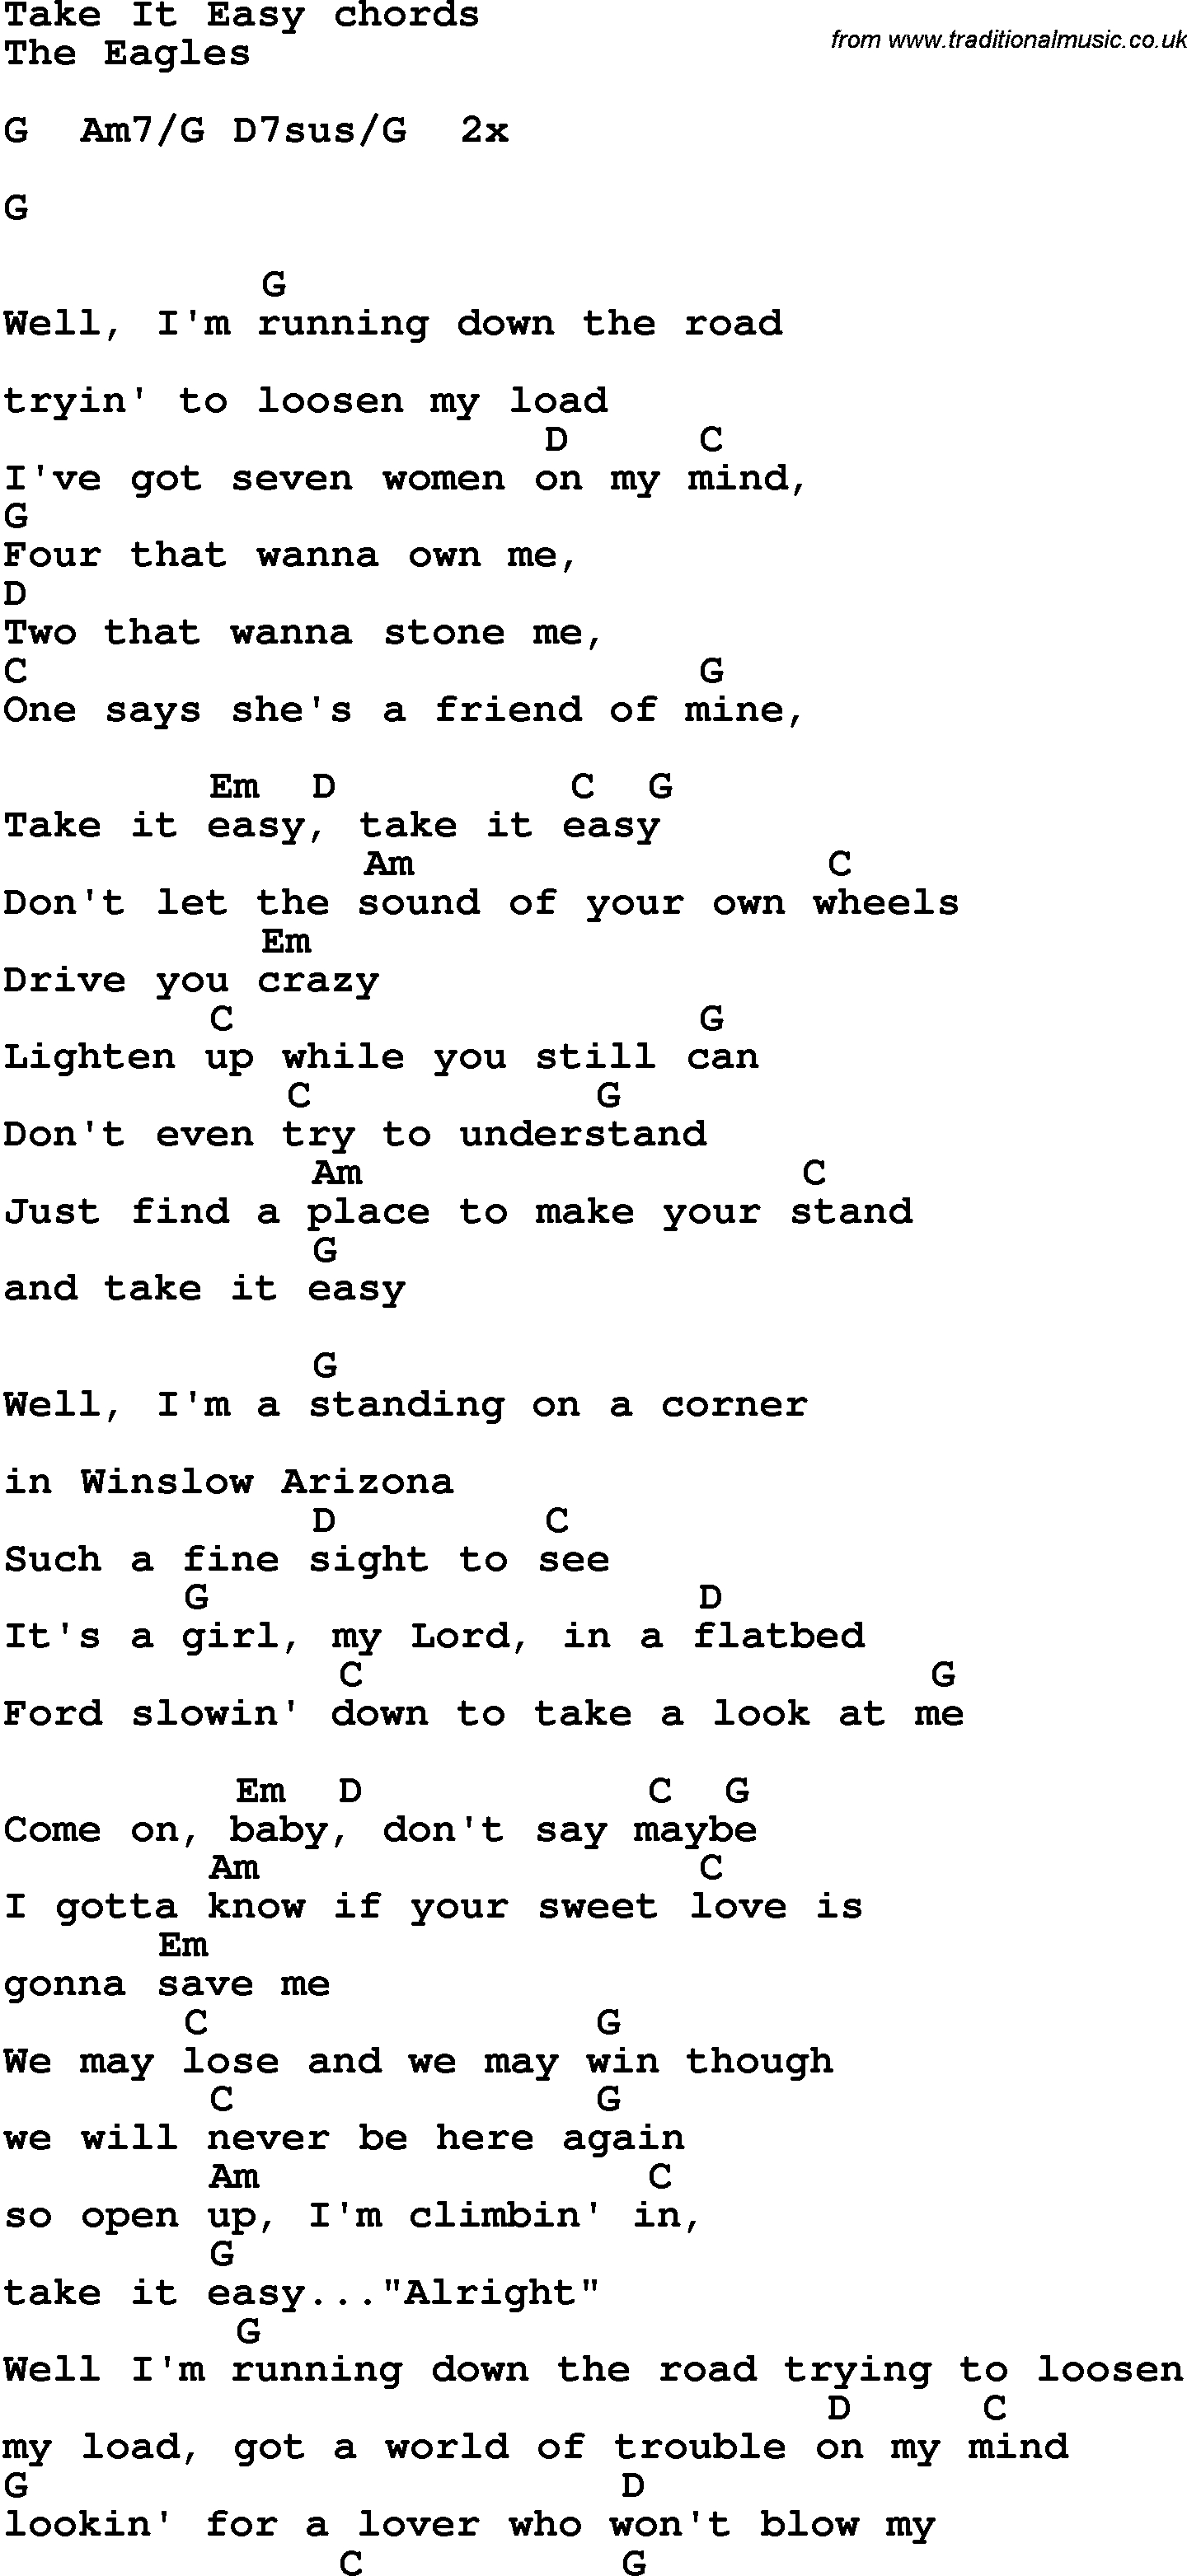 Take It Easy Chords Song Lyrics With Guitar Chords For Take It Easy The Eagles